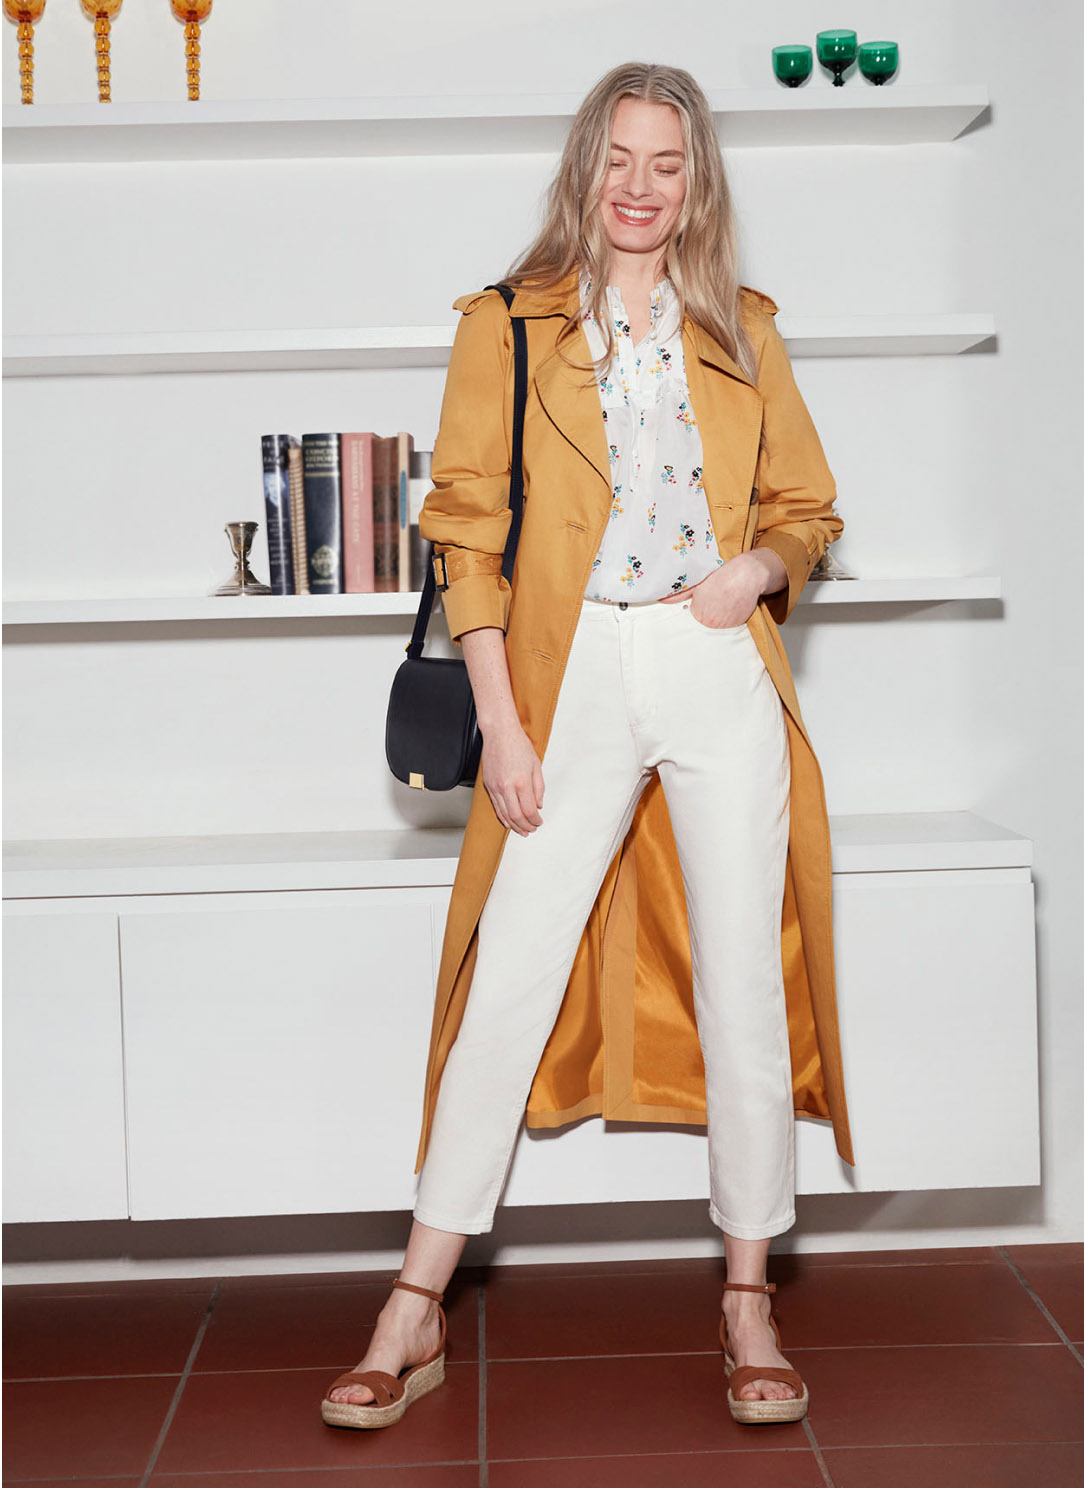 Model standing in front of a bookcase wearing a sandy yellow trench coat over a cream top and jeans.